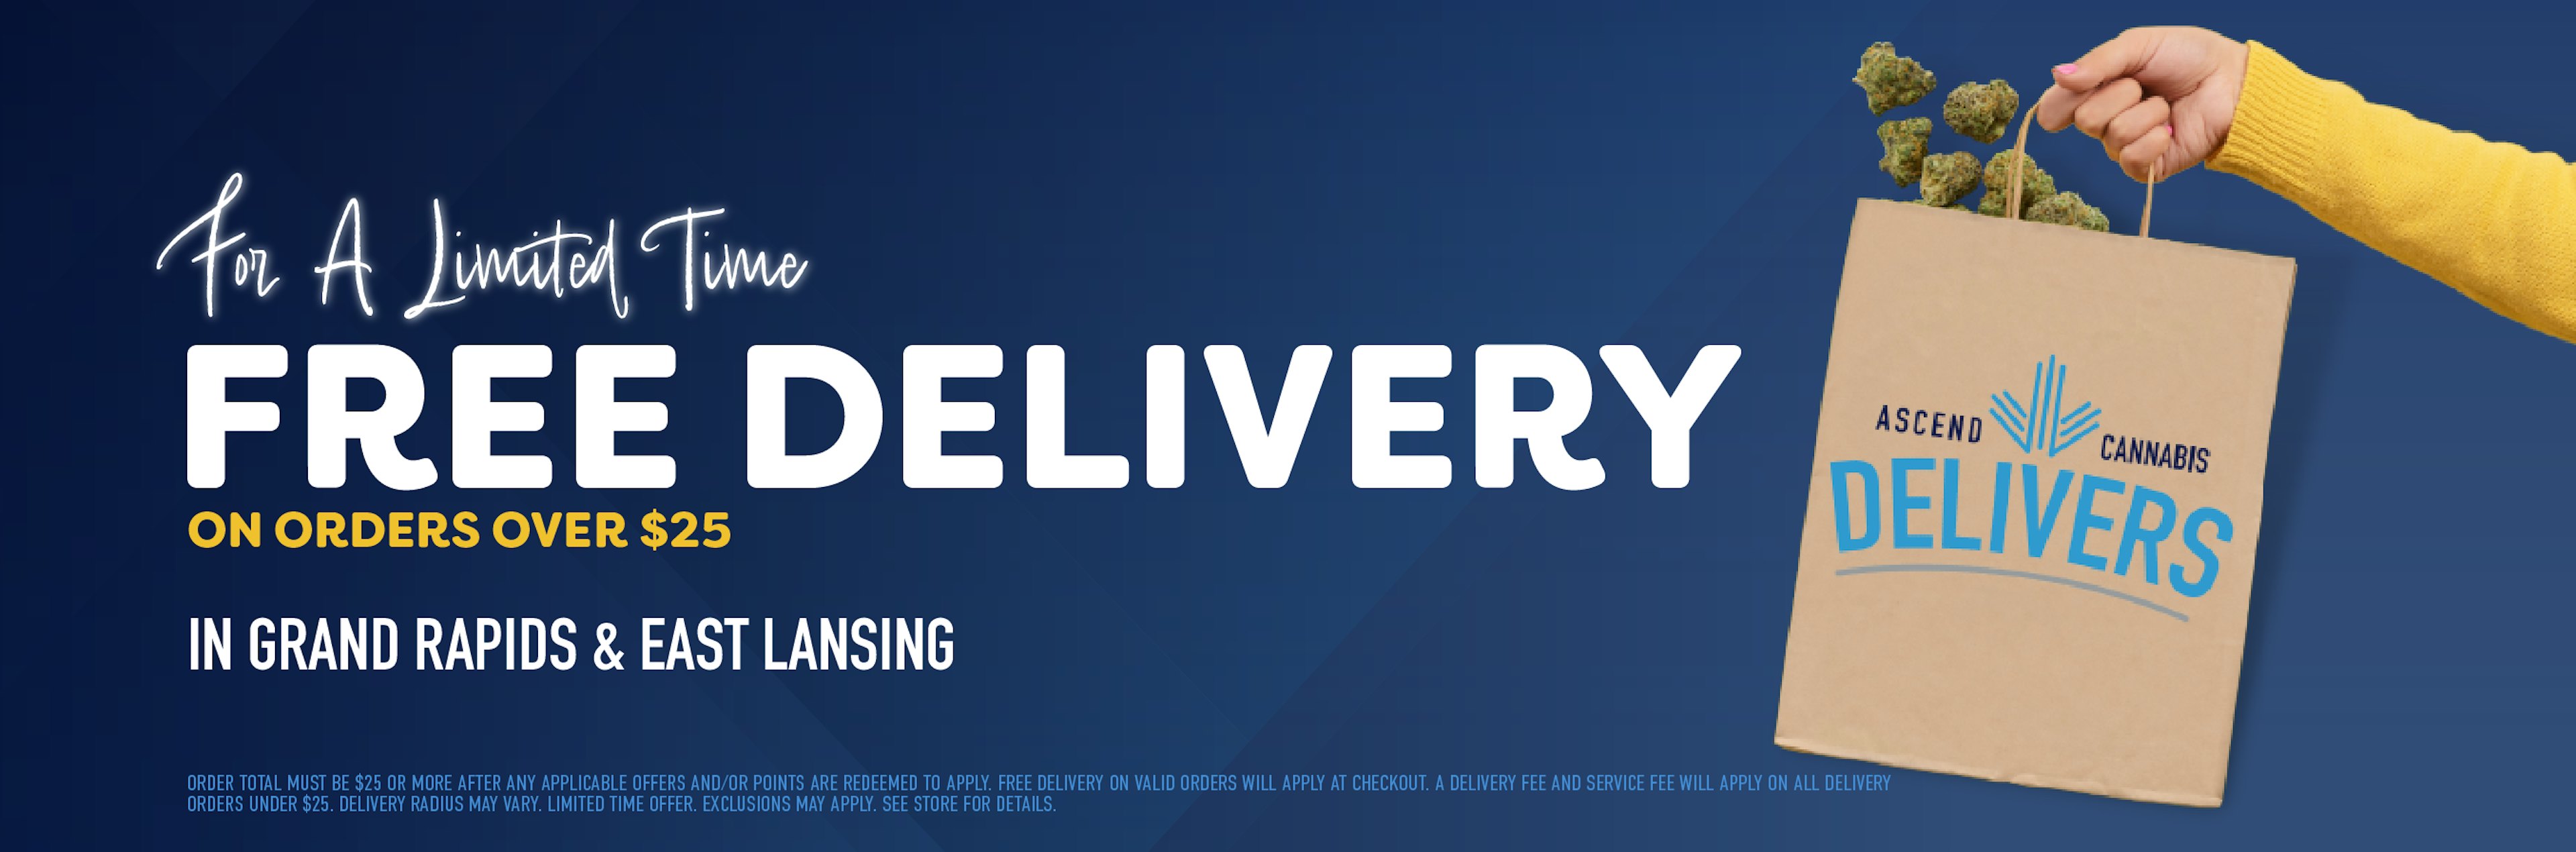 Delivery banner 2